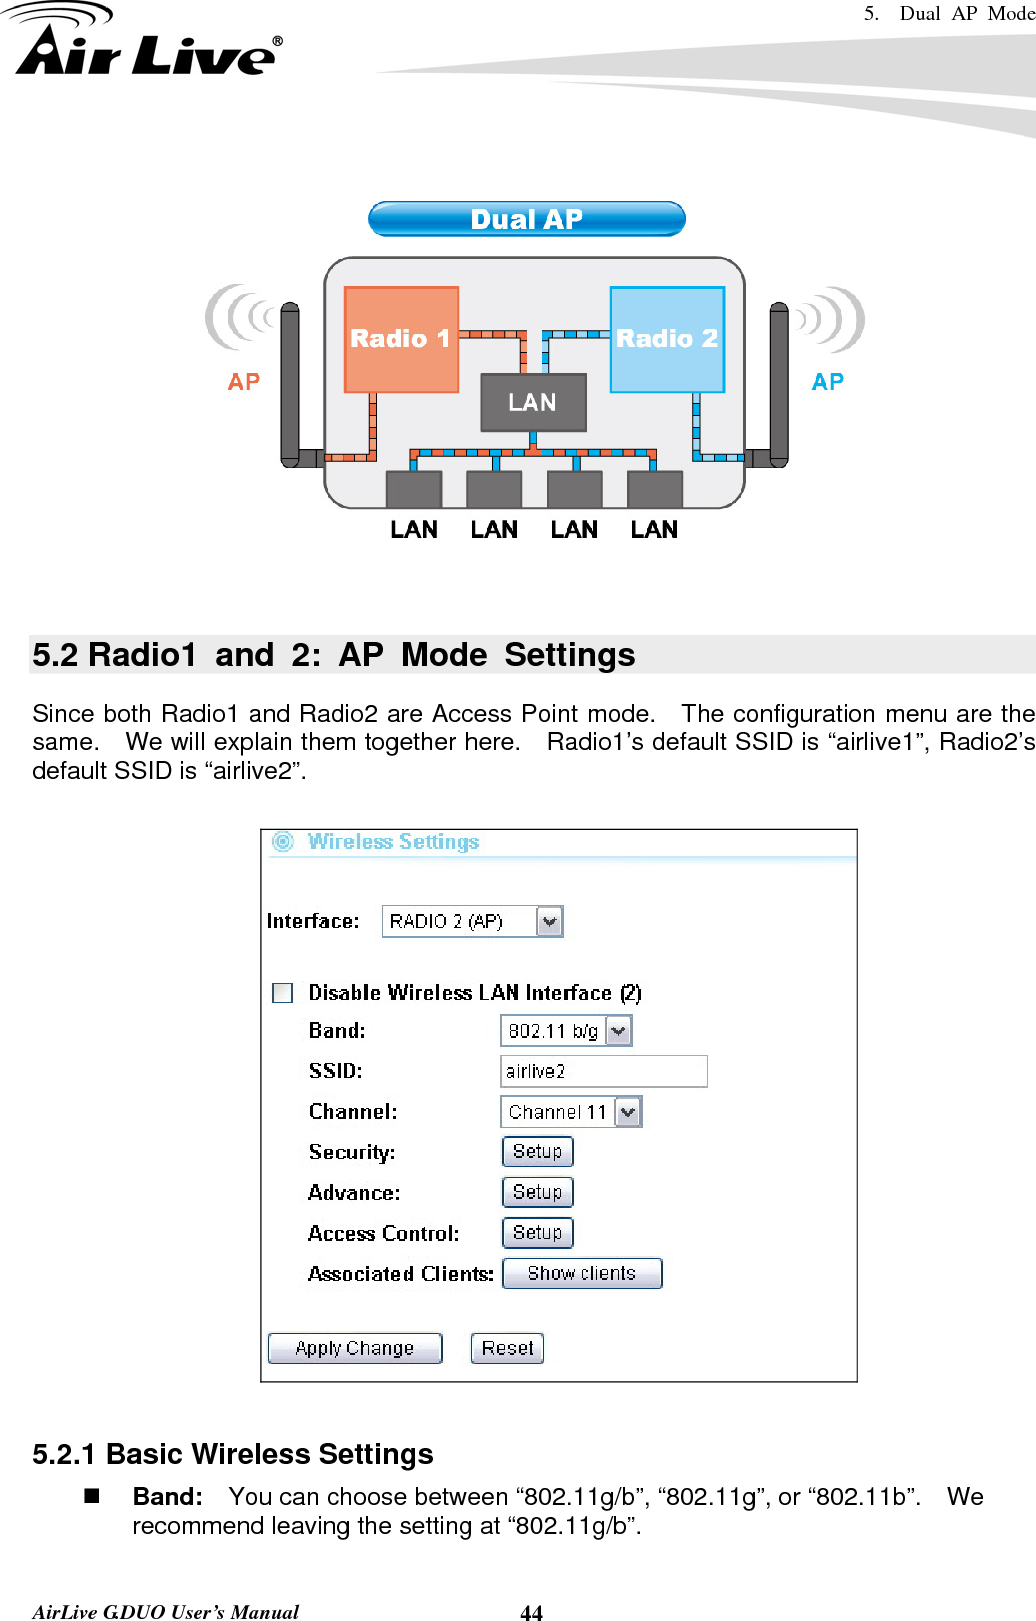 5.  Dual AP Mode    AirLive G.DUO User’s Manual  44    5.2 Radio1 and 2: AP Mode Settings Since both Radio1 and Radio2 are Access Point mode.    The configuration menu are the same.    We will explain them together here.    Radio1’s default SSID is “airlive1”, Radio2’s default SSID is “airlive2”.    5.2.1 Basic Wireless Settings  Band:    You can choose between “802.11g/b”, “802.11g”, or “802.11b”.    We recommend leaving the setting at “802.11g/b”. 